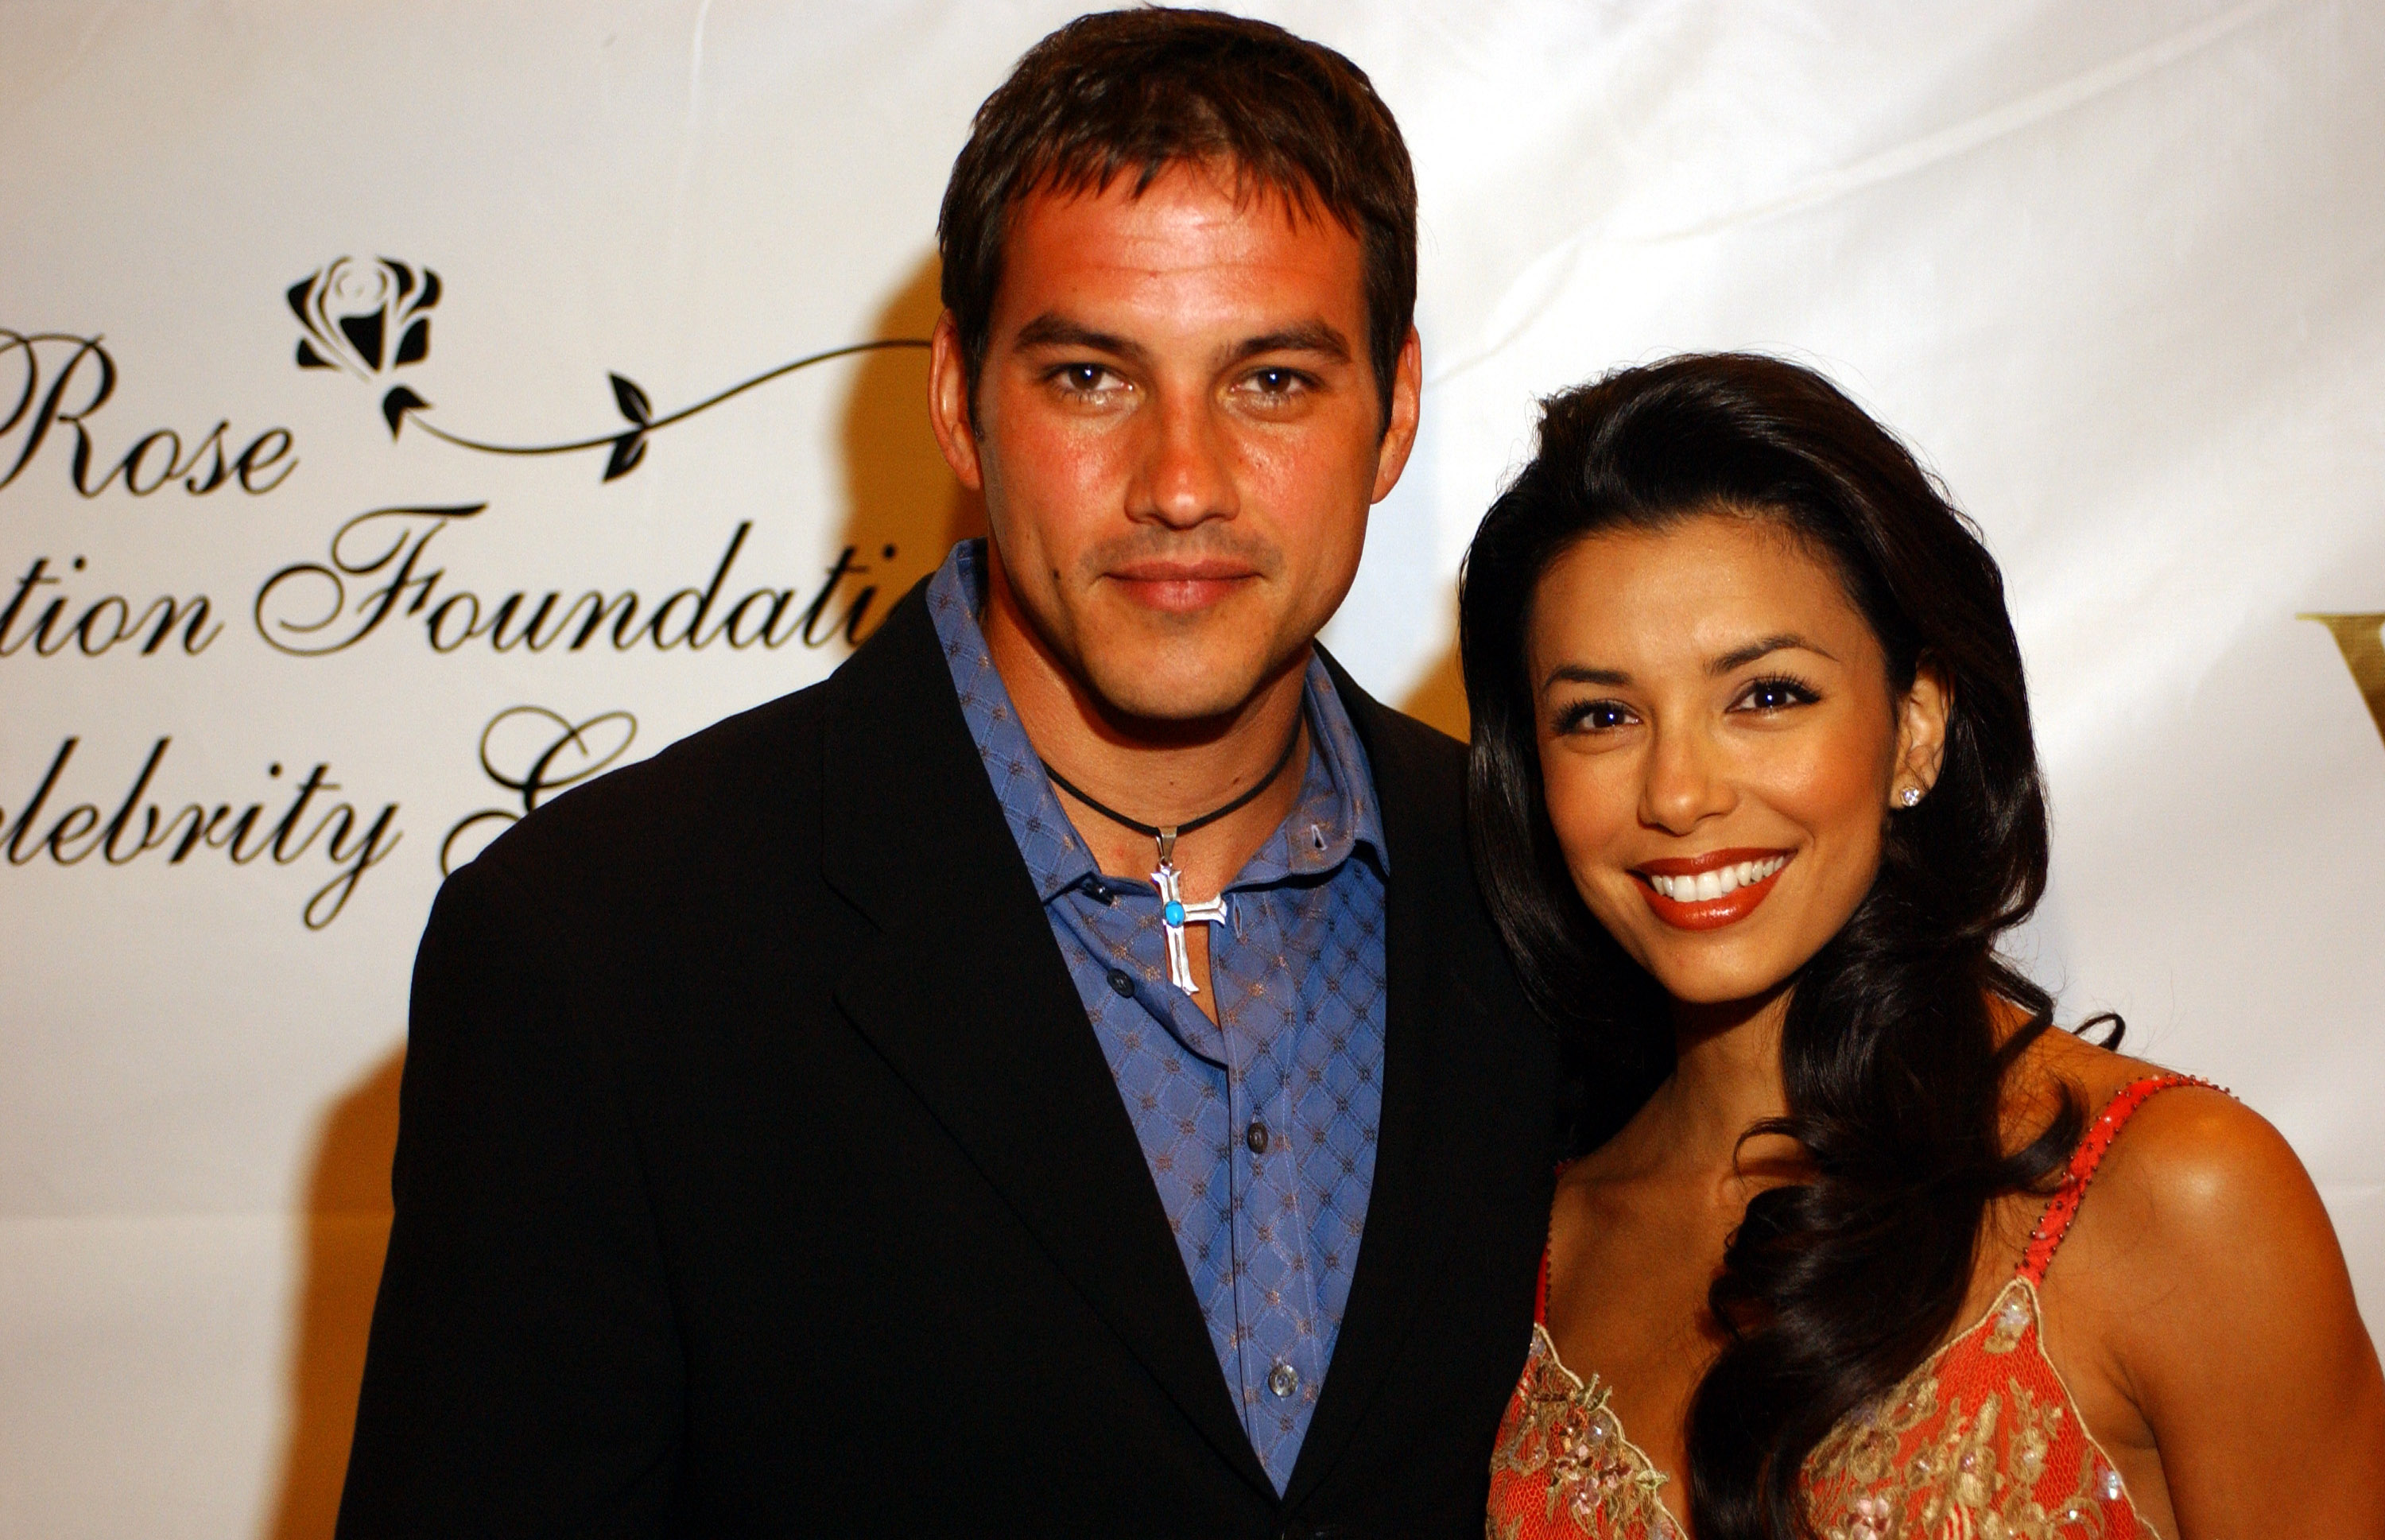 Tyler Christopher and Eva Longoria at The Rose Education Foundation's second annual gala on June 28, 2003 | Source: Getty Images